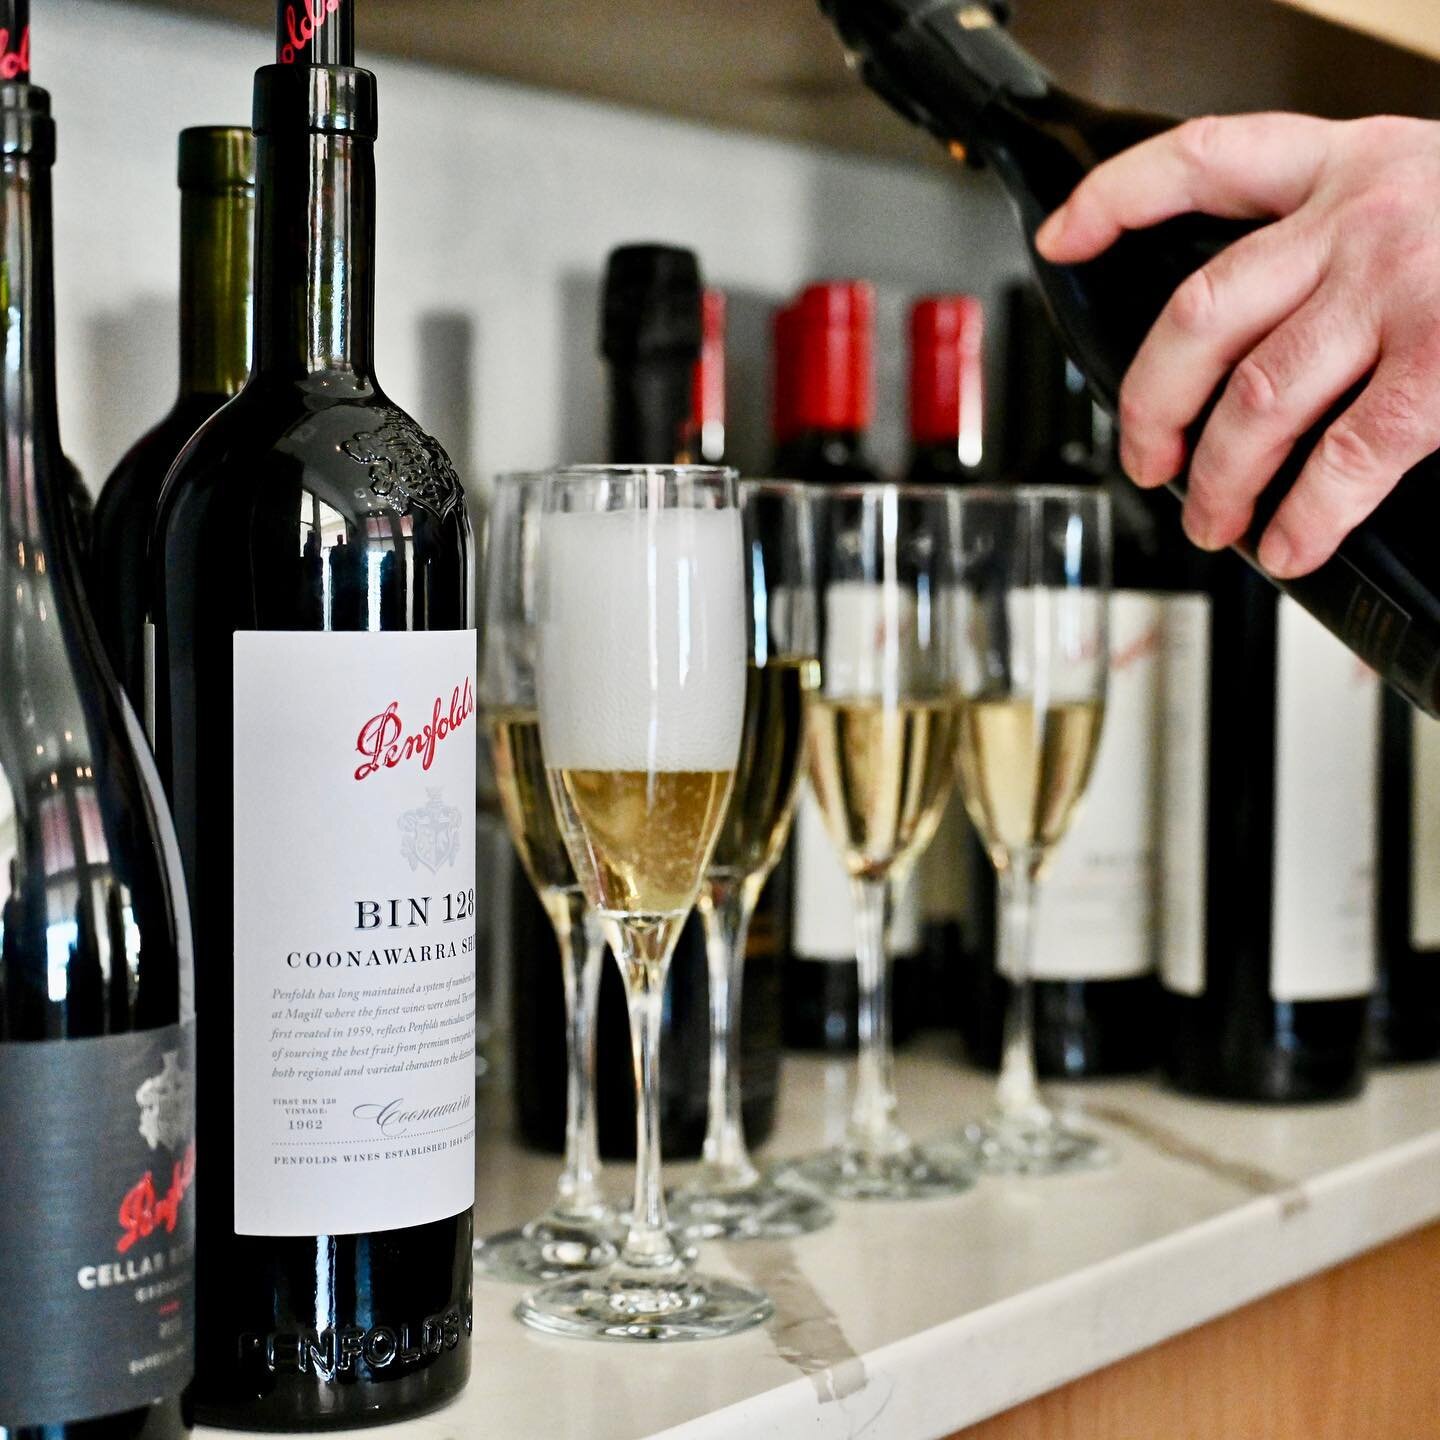 #CLTWineandFood Week presented by @truist held a restaurant vintner dinner at @bonterradining on Wednesday, April 19th, featuring Australia&rsquo;s most iconic winery, @penfolds!

Guests enjoyed a four-course dinner created by Executive Chef Ryan Mur